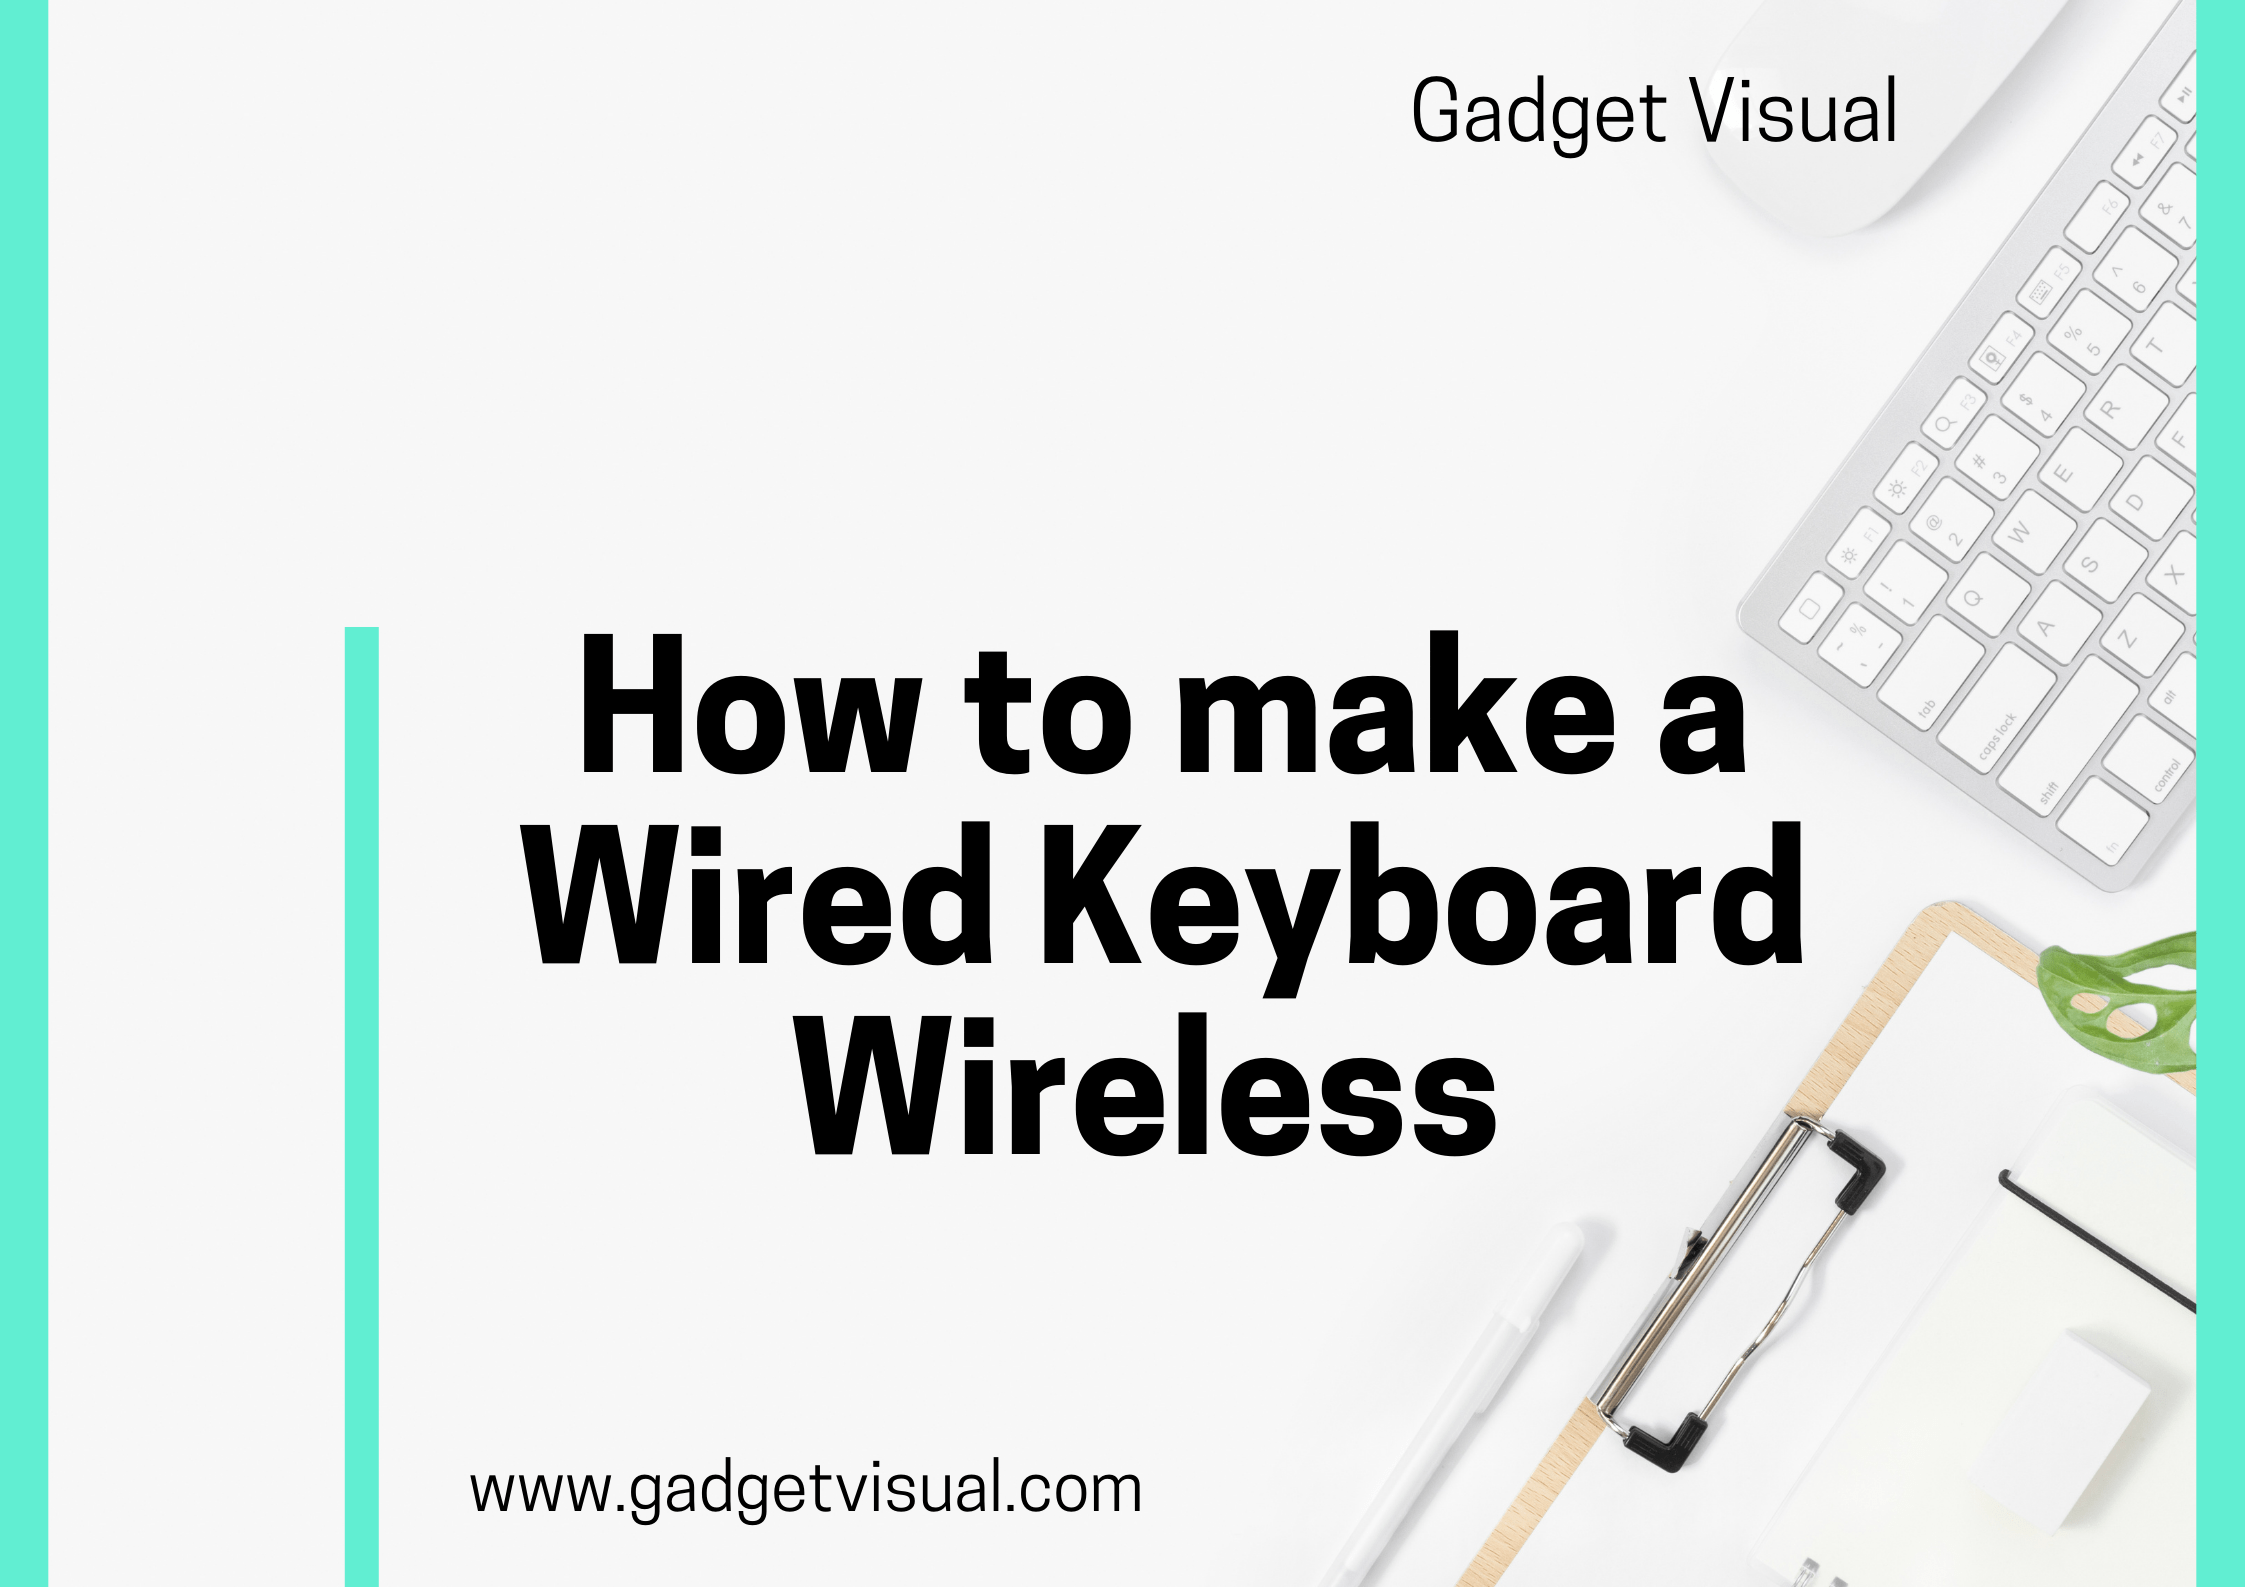 How to make a Wired Keyboard Wireless